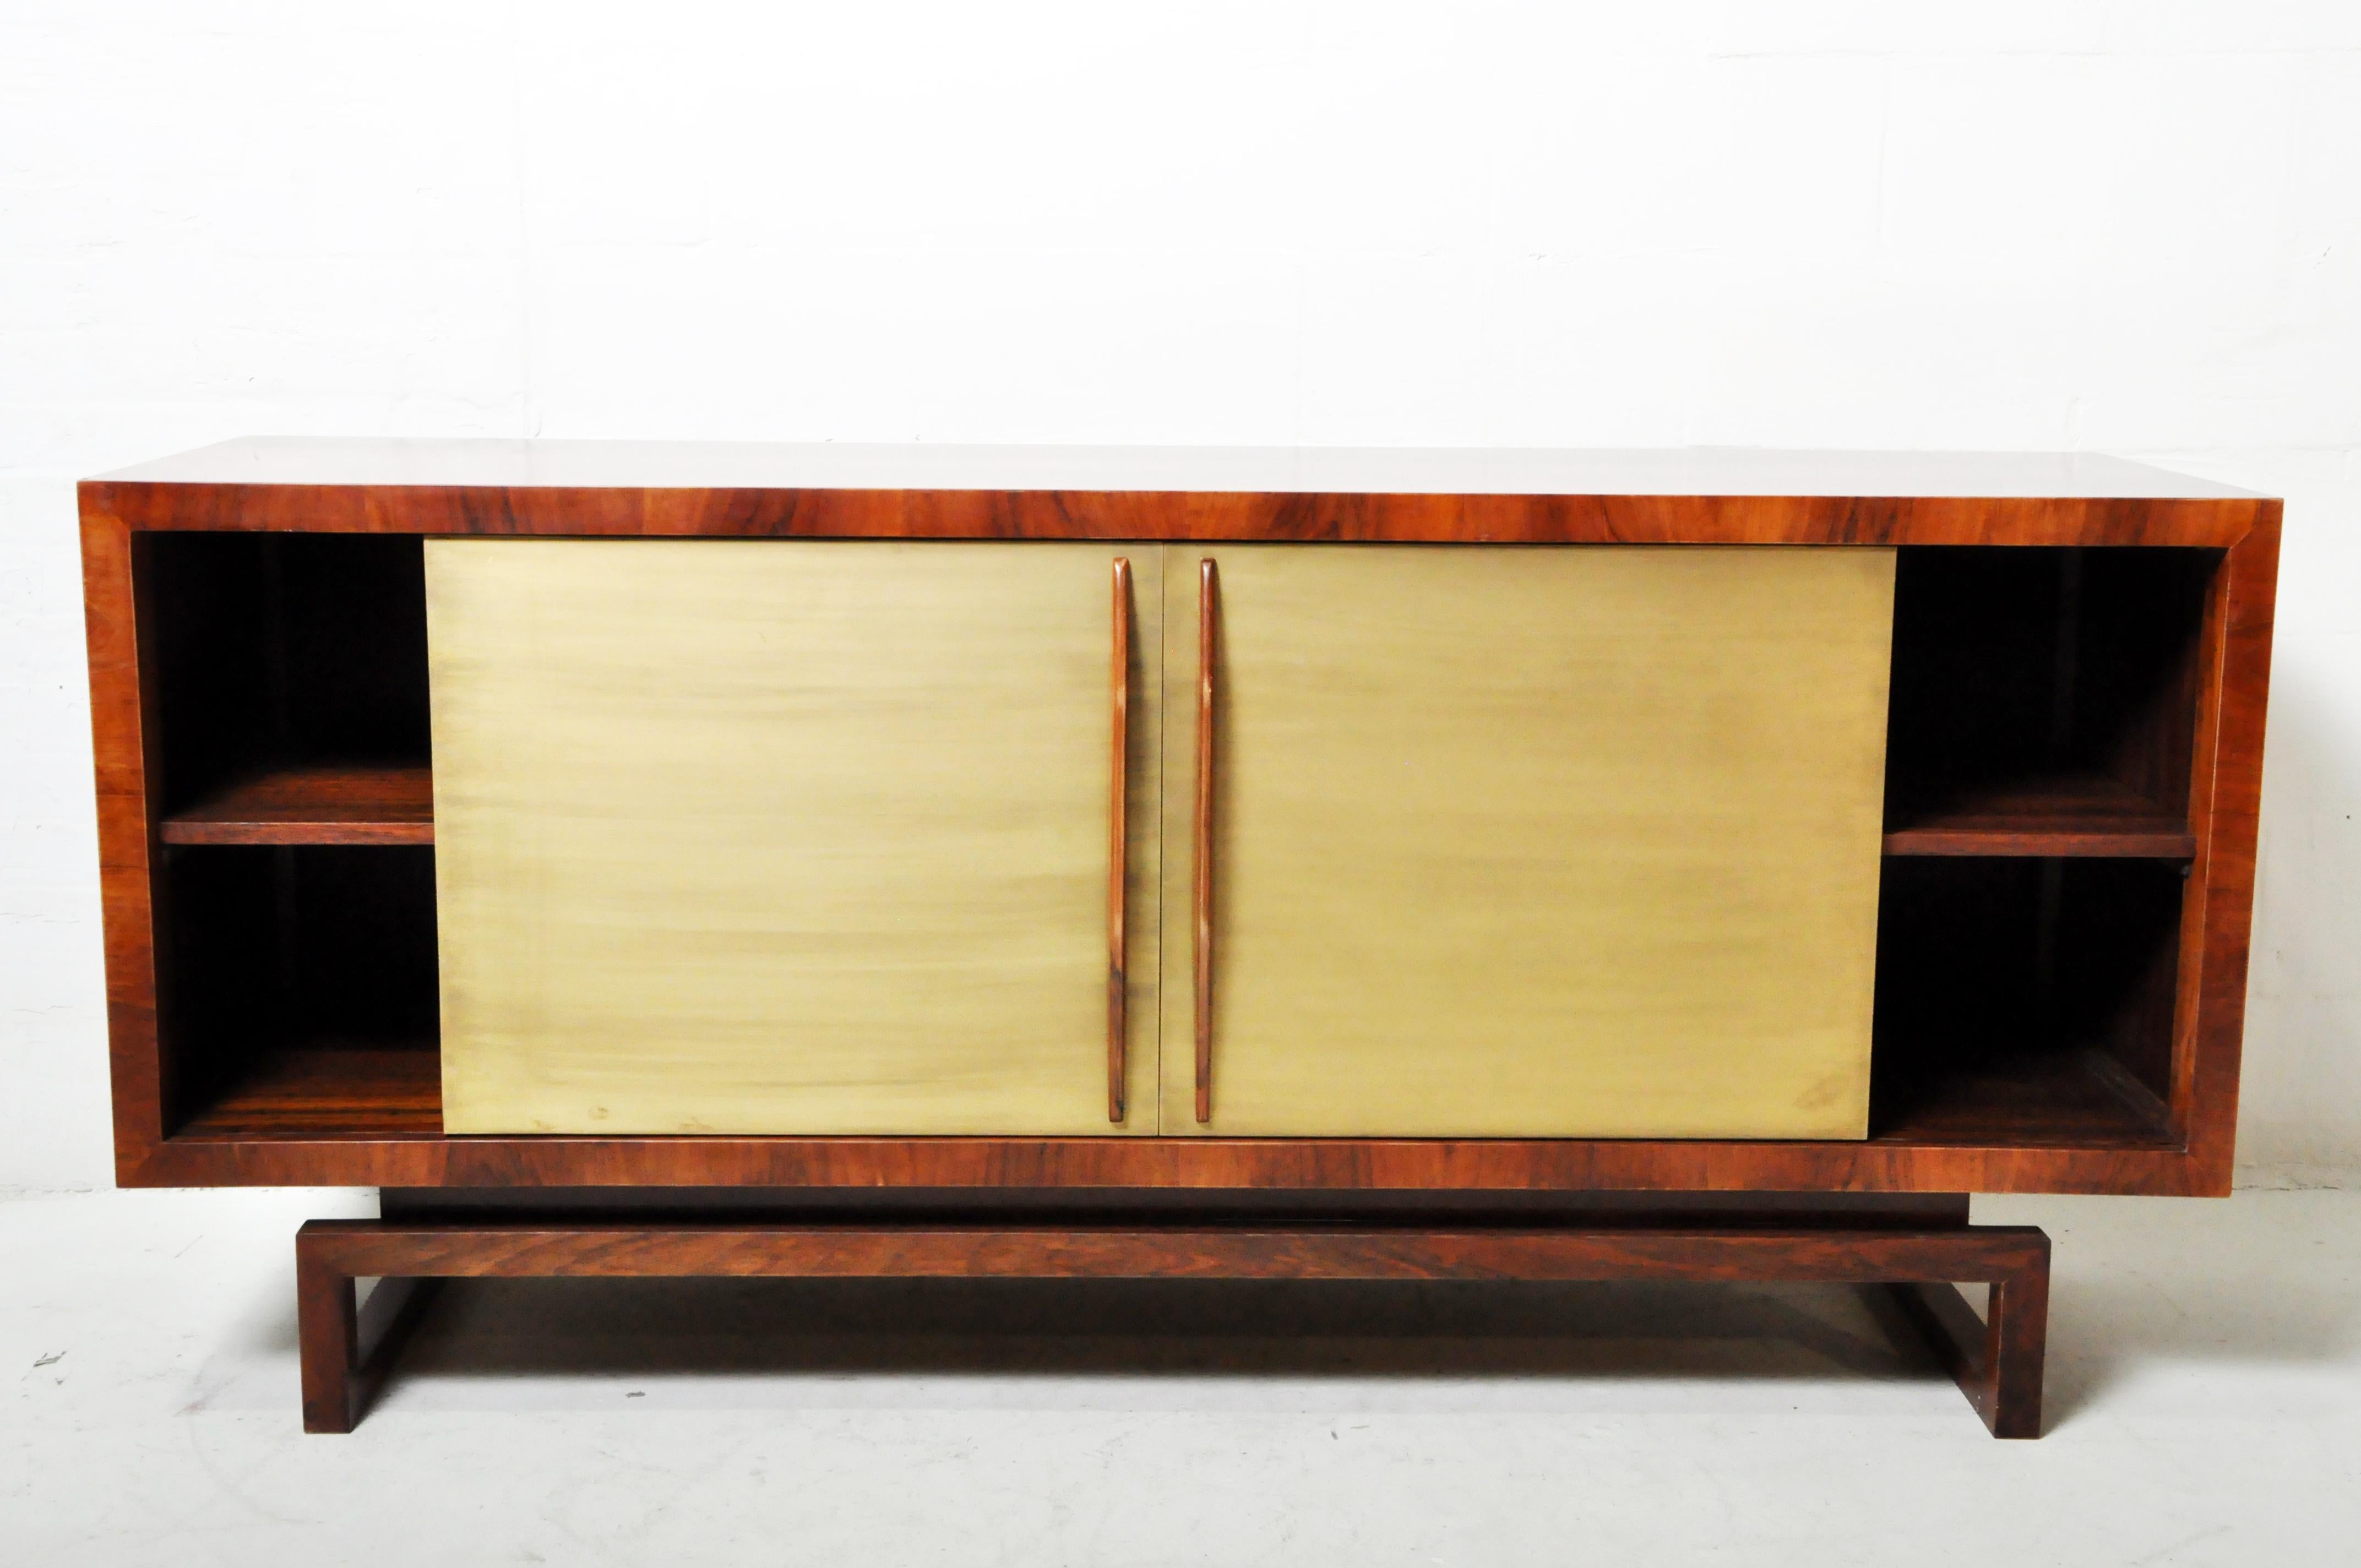 Hungarian Vintage Walnut Sideboard with Two Brass Doors and Three Drawers